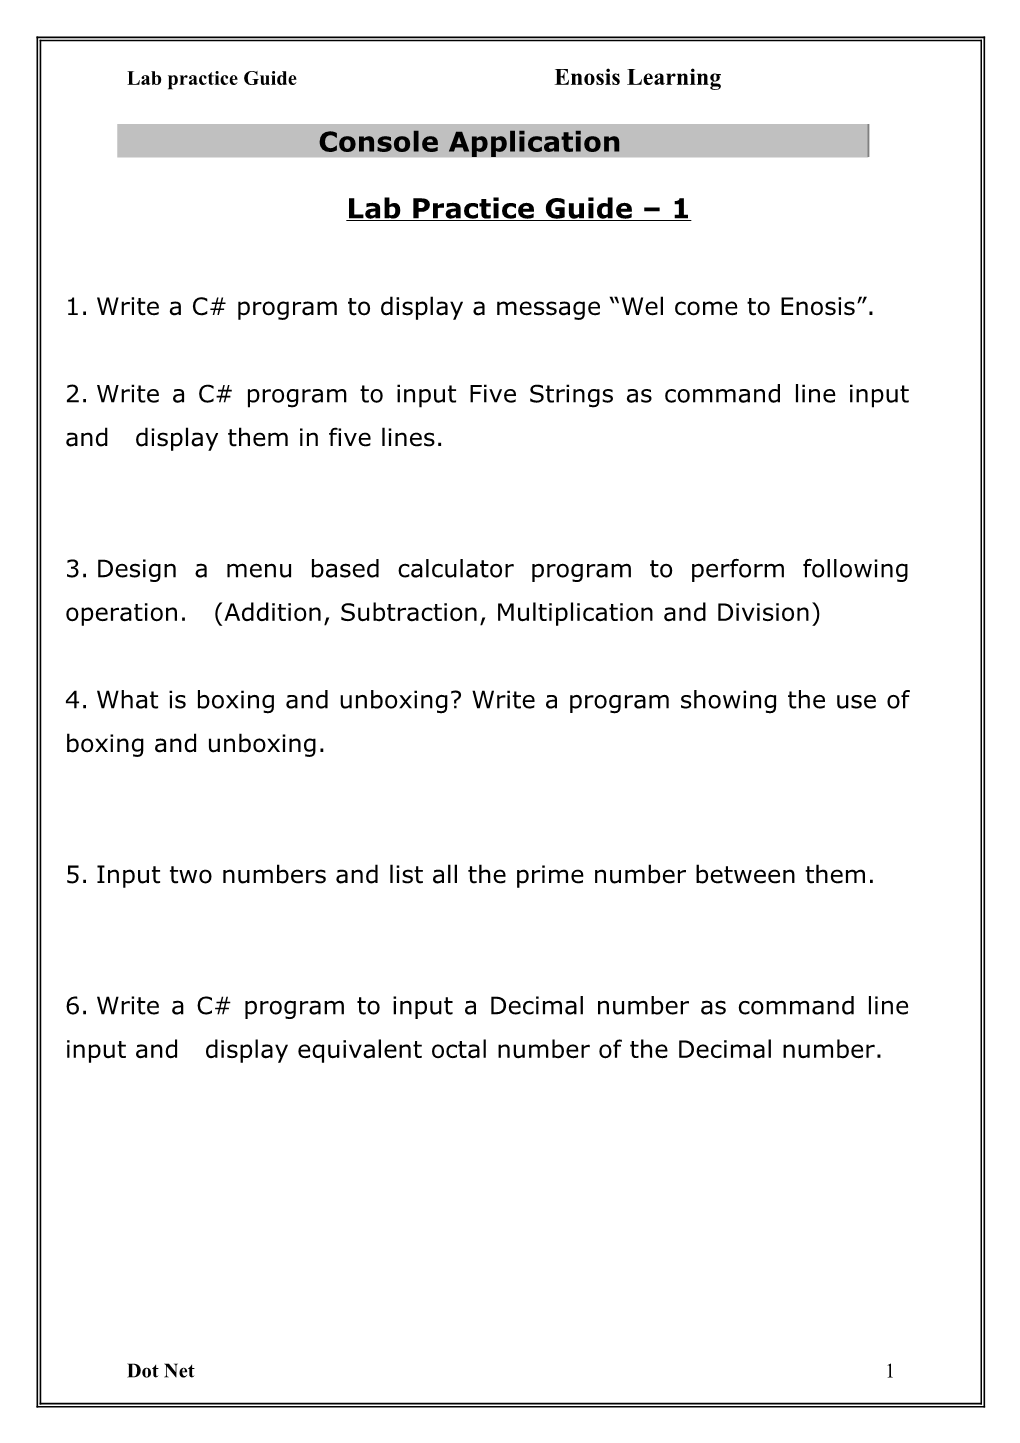 Lab Practice Guide Enosis Learning